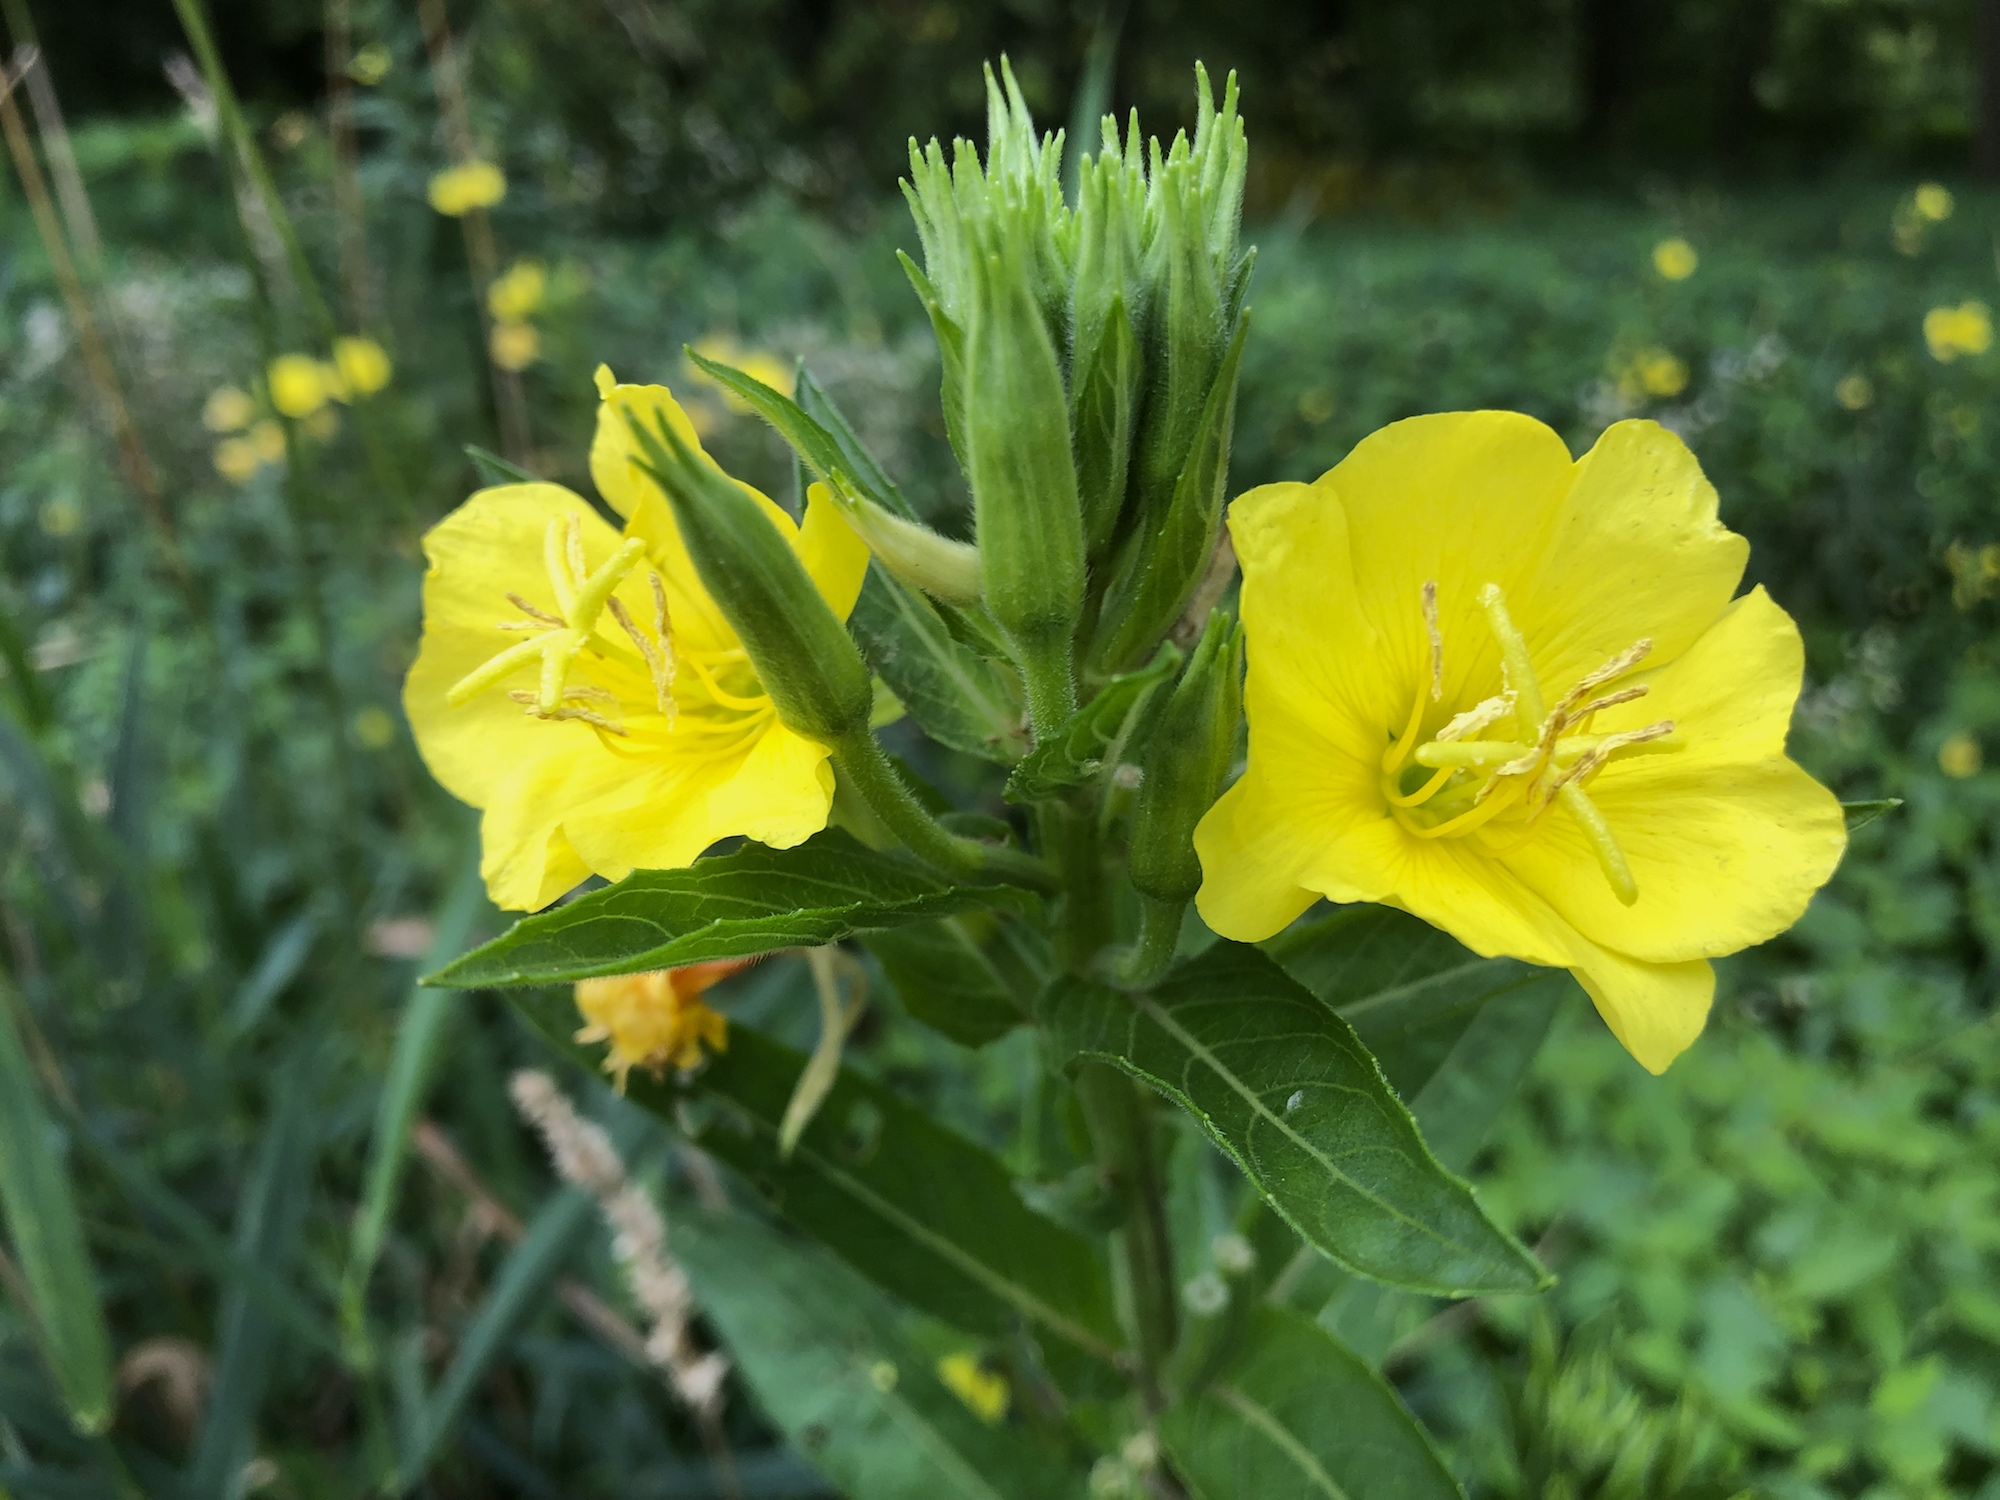 Evening Primrose on shore of Marion Dunn Pond on August 21, 2019.